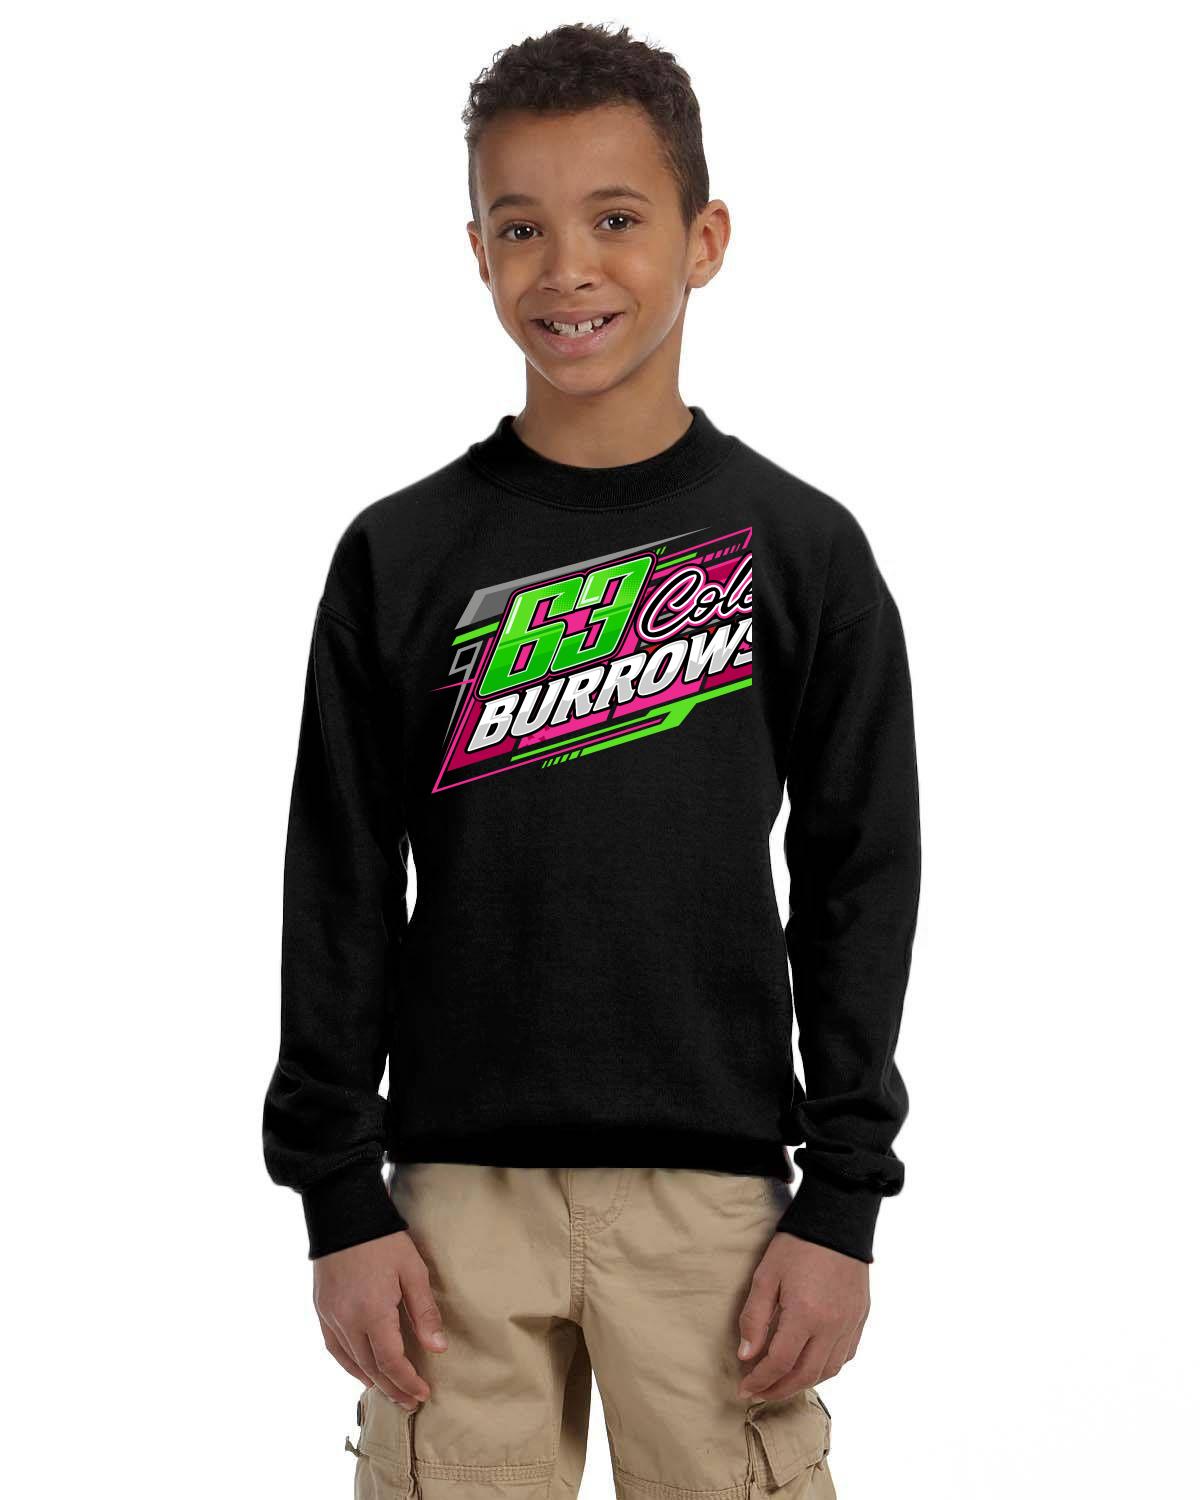 Cole Burrows Racing Youth Crew neck sweater